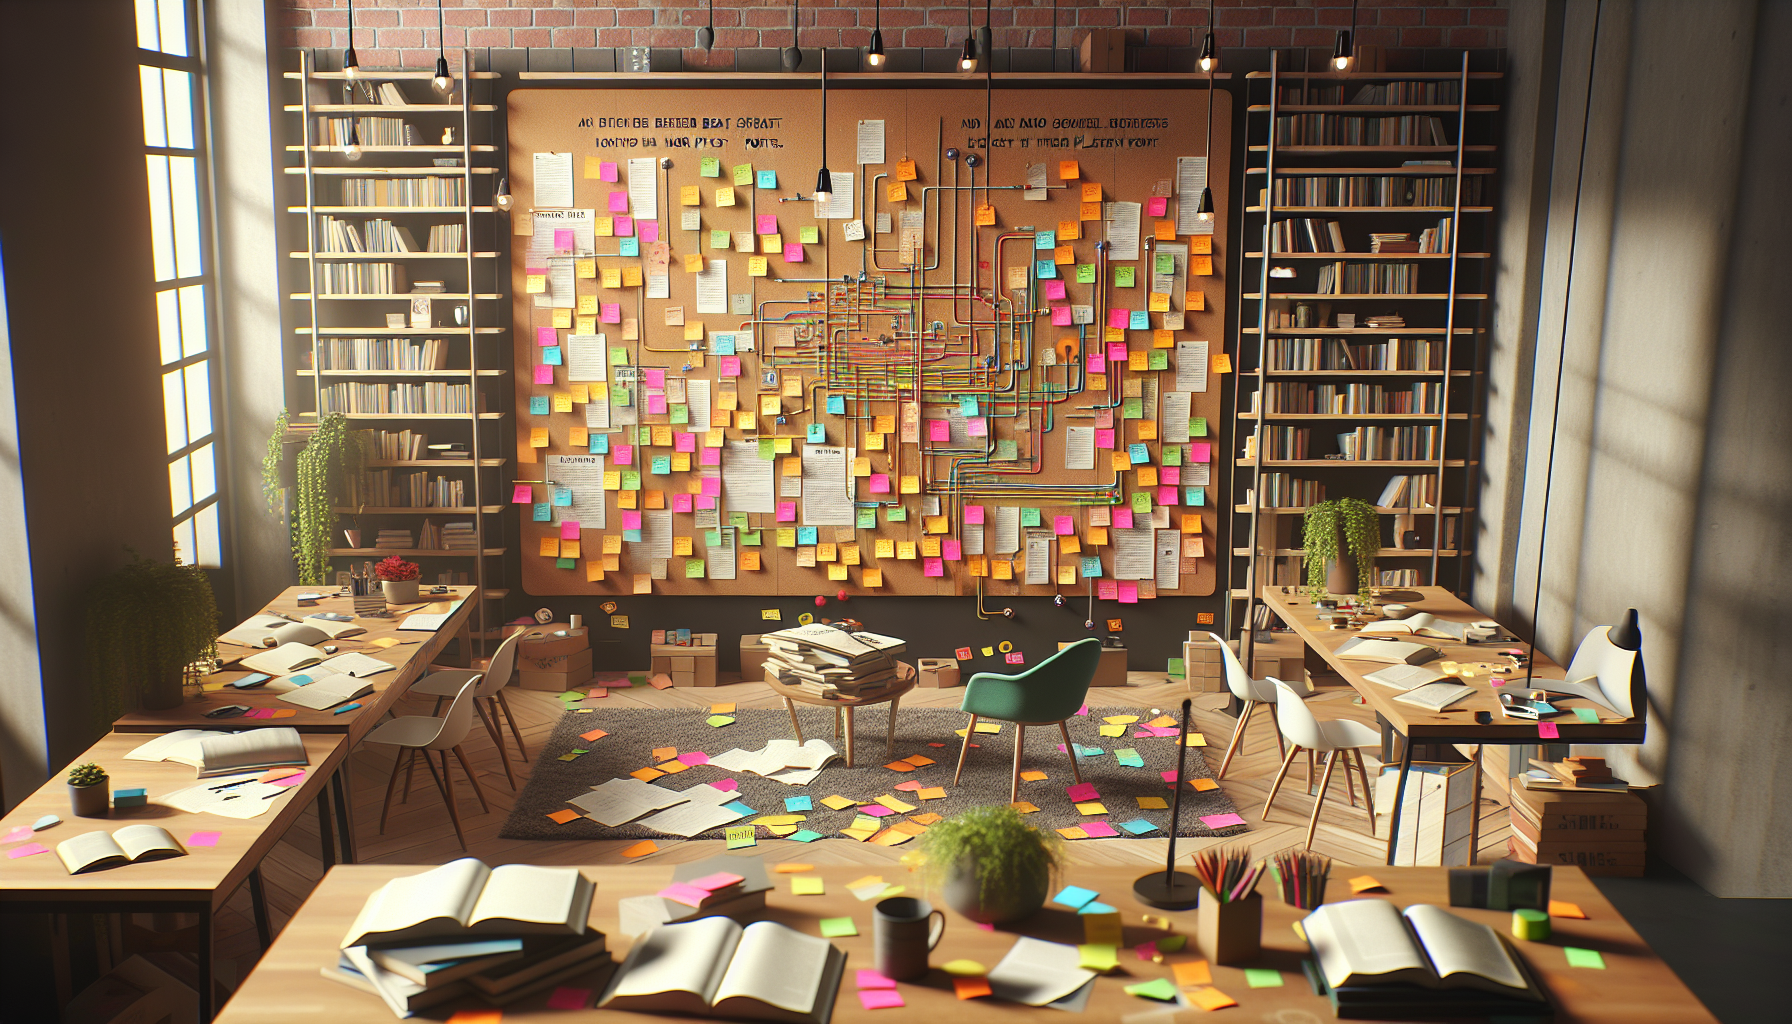 An artist's studio filled with open books, colorful post-it notes, and a large cork board displaying the detailed beat sheet for 'The Authenticity Project' novel, with scribbles and notes linking the